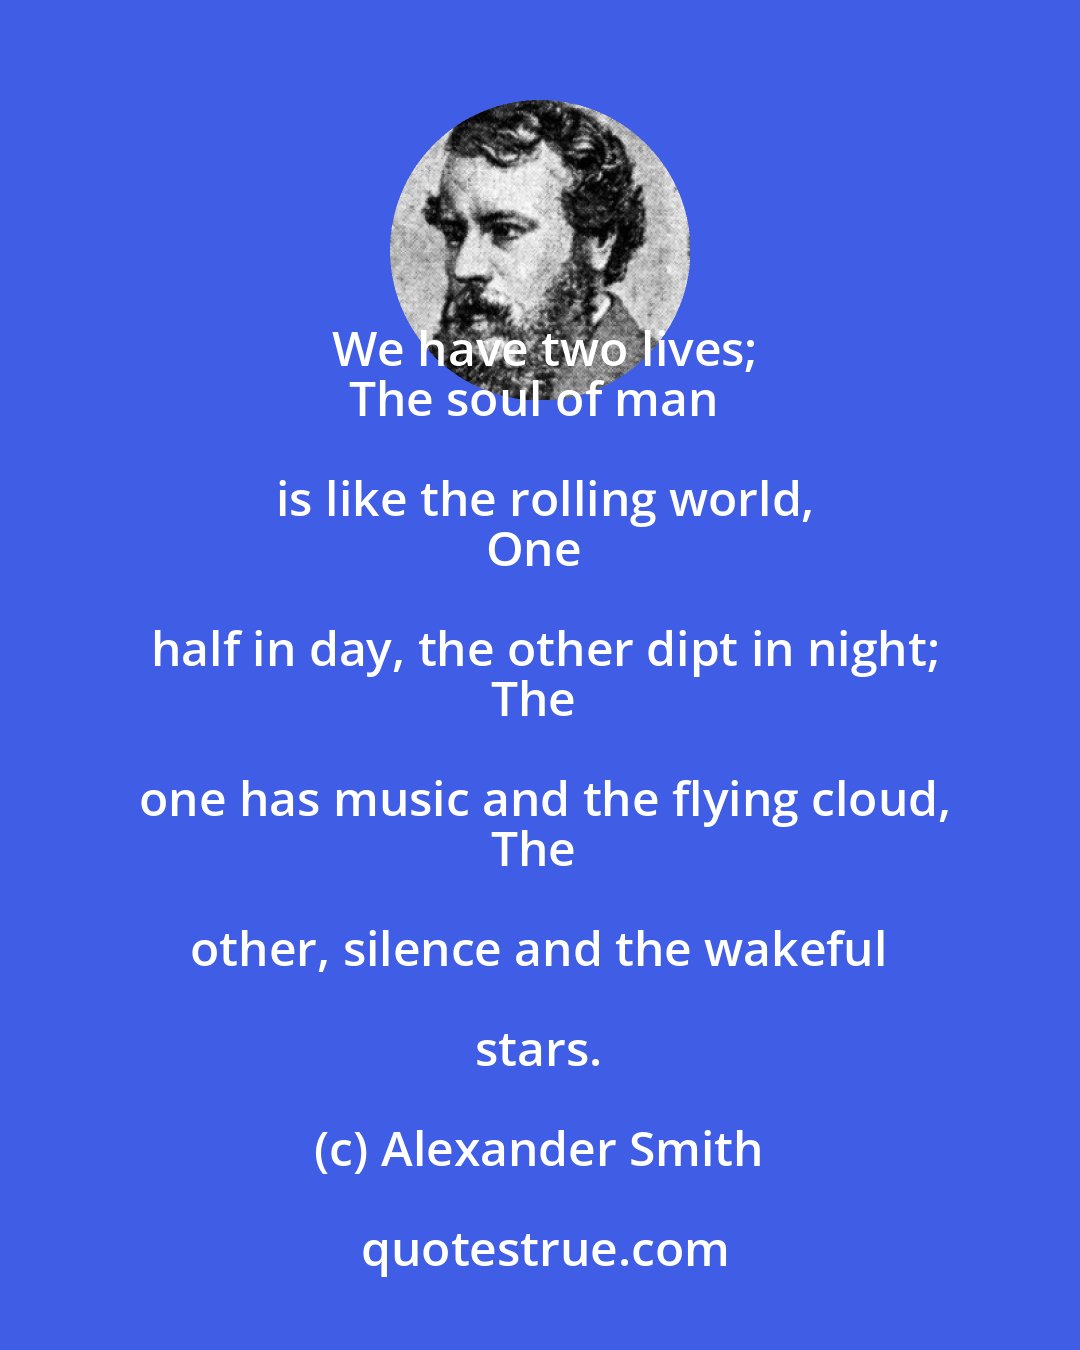 Alexander Smith: We have two lives;
The soul of man is like the rolling world,
One half in day, the other dipt in night;
The one has music and the flying cloud,
The other, silence and the wakeful stars.